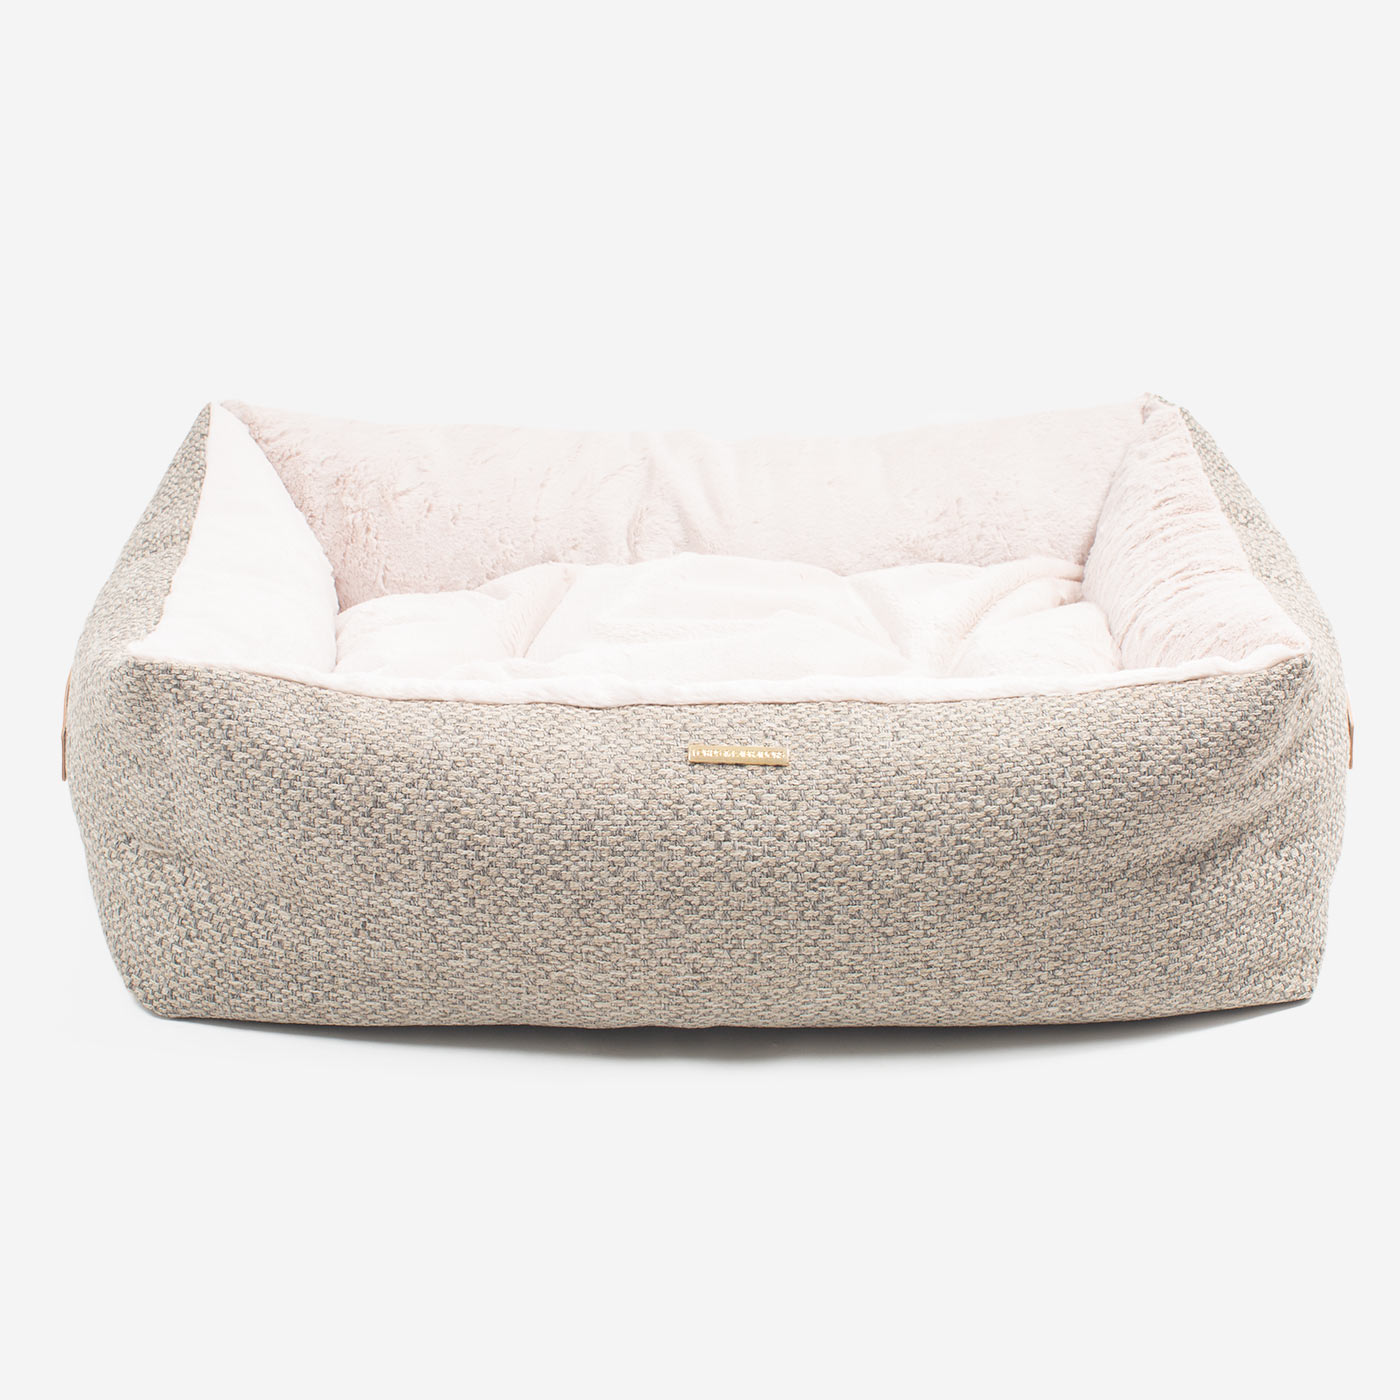 Discover This Luxurious Box Bed For Dogs, Made Using Beautiful Herdwick Fabric To Craft The Perfect Dog Box Bed! In Stunning Pebble, Available Now at Lords & Labradors US